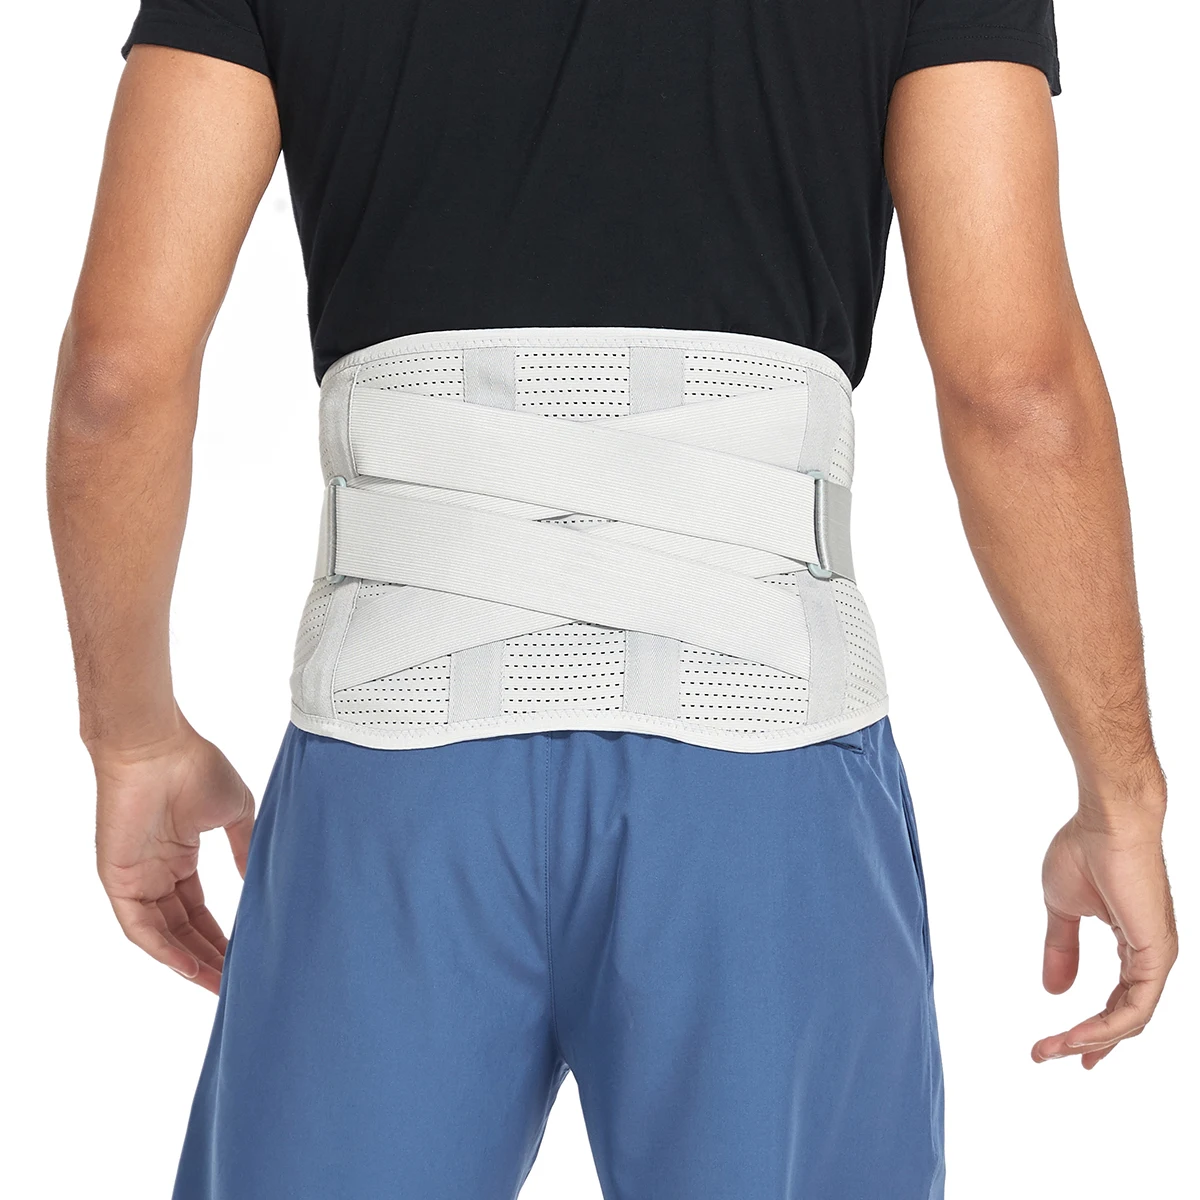 Back Brace for Men Breathable Waist Shapers Lumbar Lower Back Support Belt Herniated Disc Back Pain Relief Heavy Lifting lumbar support belt lower back brace support sheath waist trainer cincher sauna sweat girdle postpartum recovery pain relief